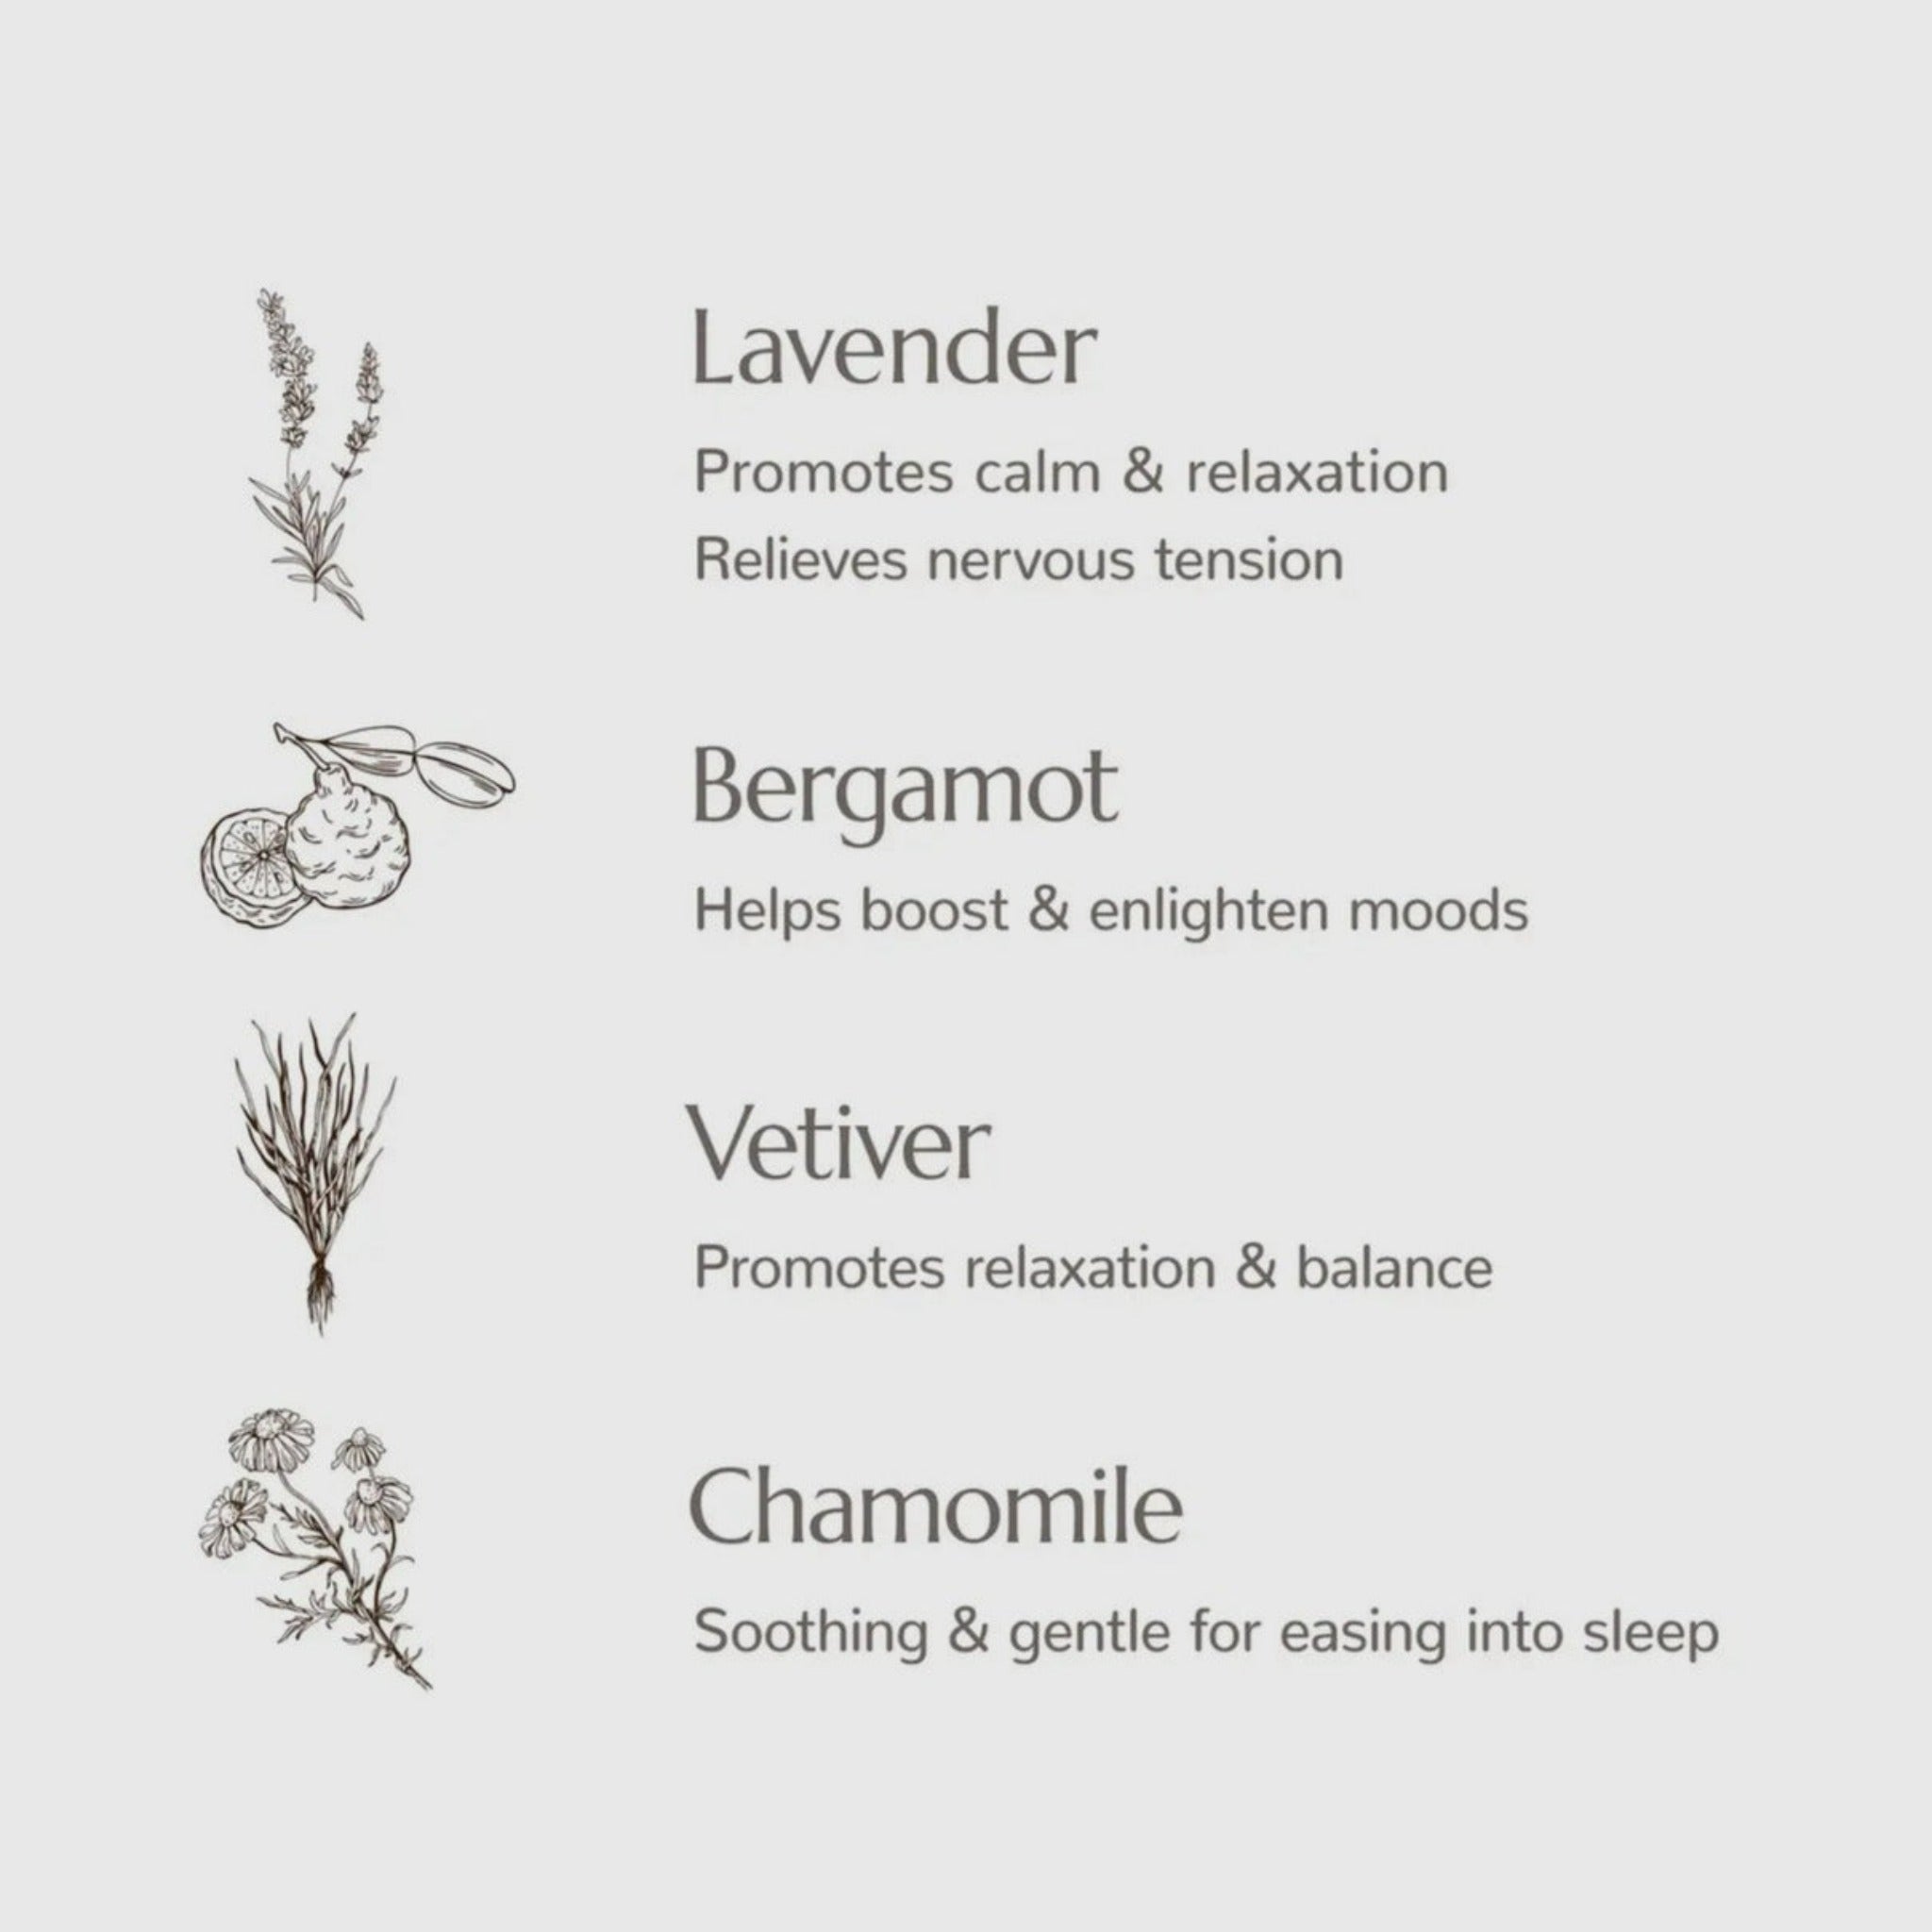 Blissful Dreams Lavender PILLOW SPRAY Plant Therapy